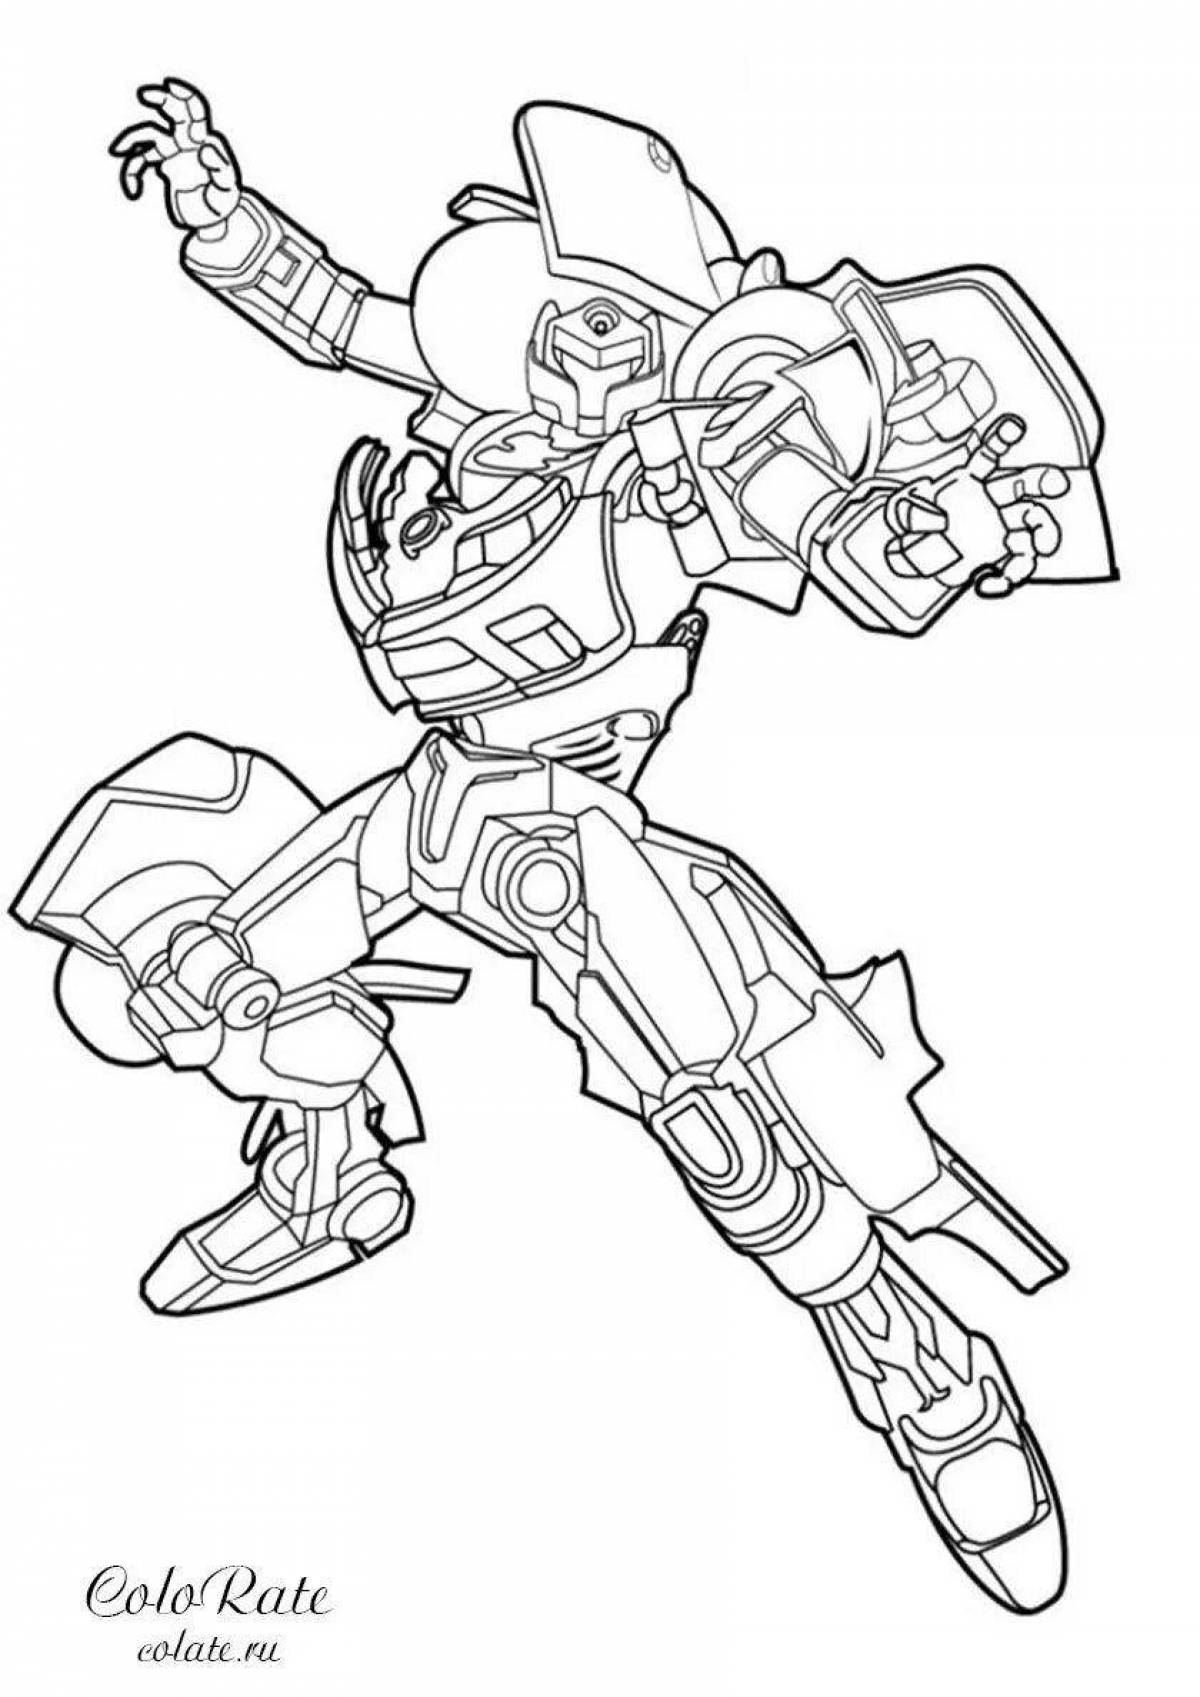 Crazy color tobot coloring page